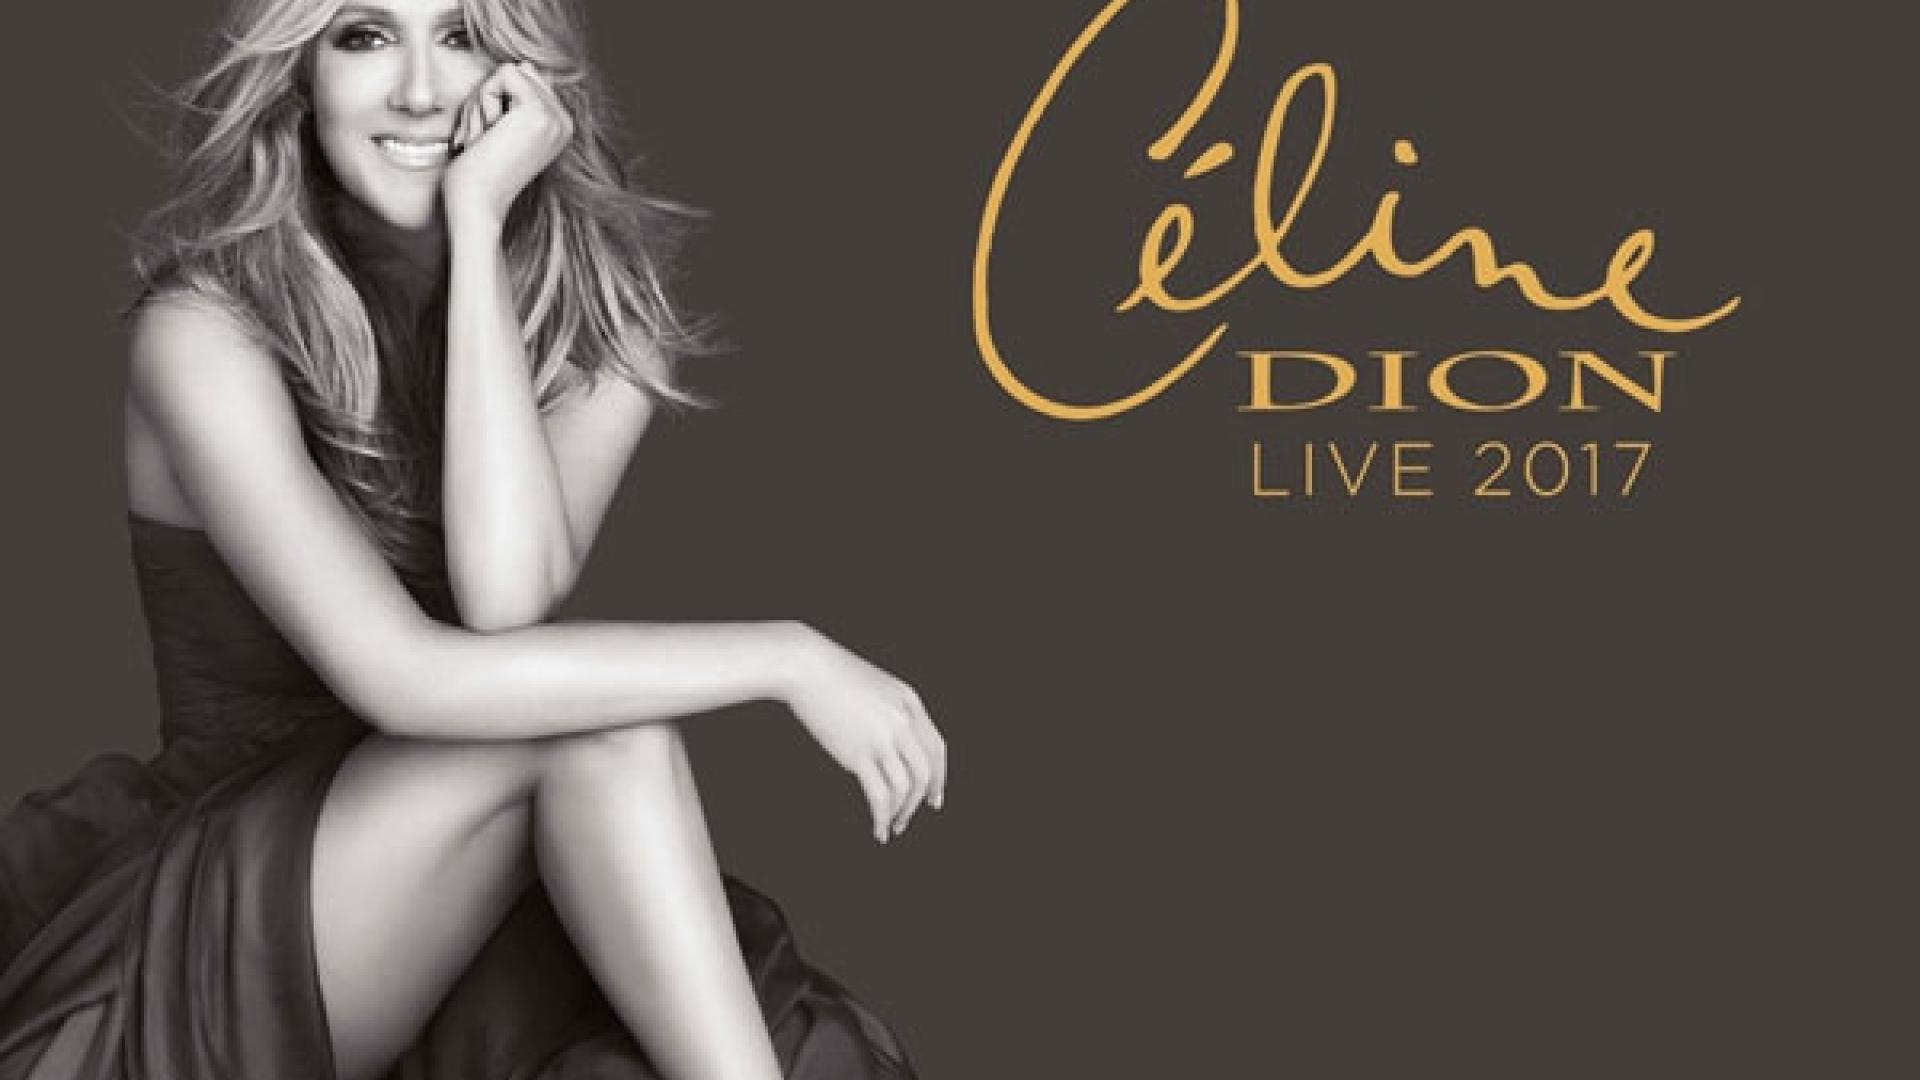 Celine Dion in concert on 08 and 09 July 2017 !